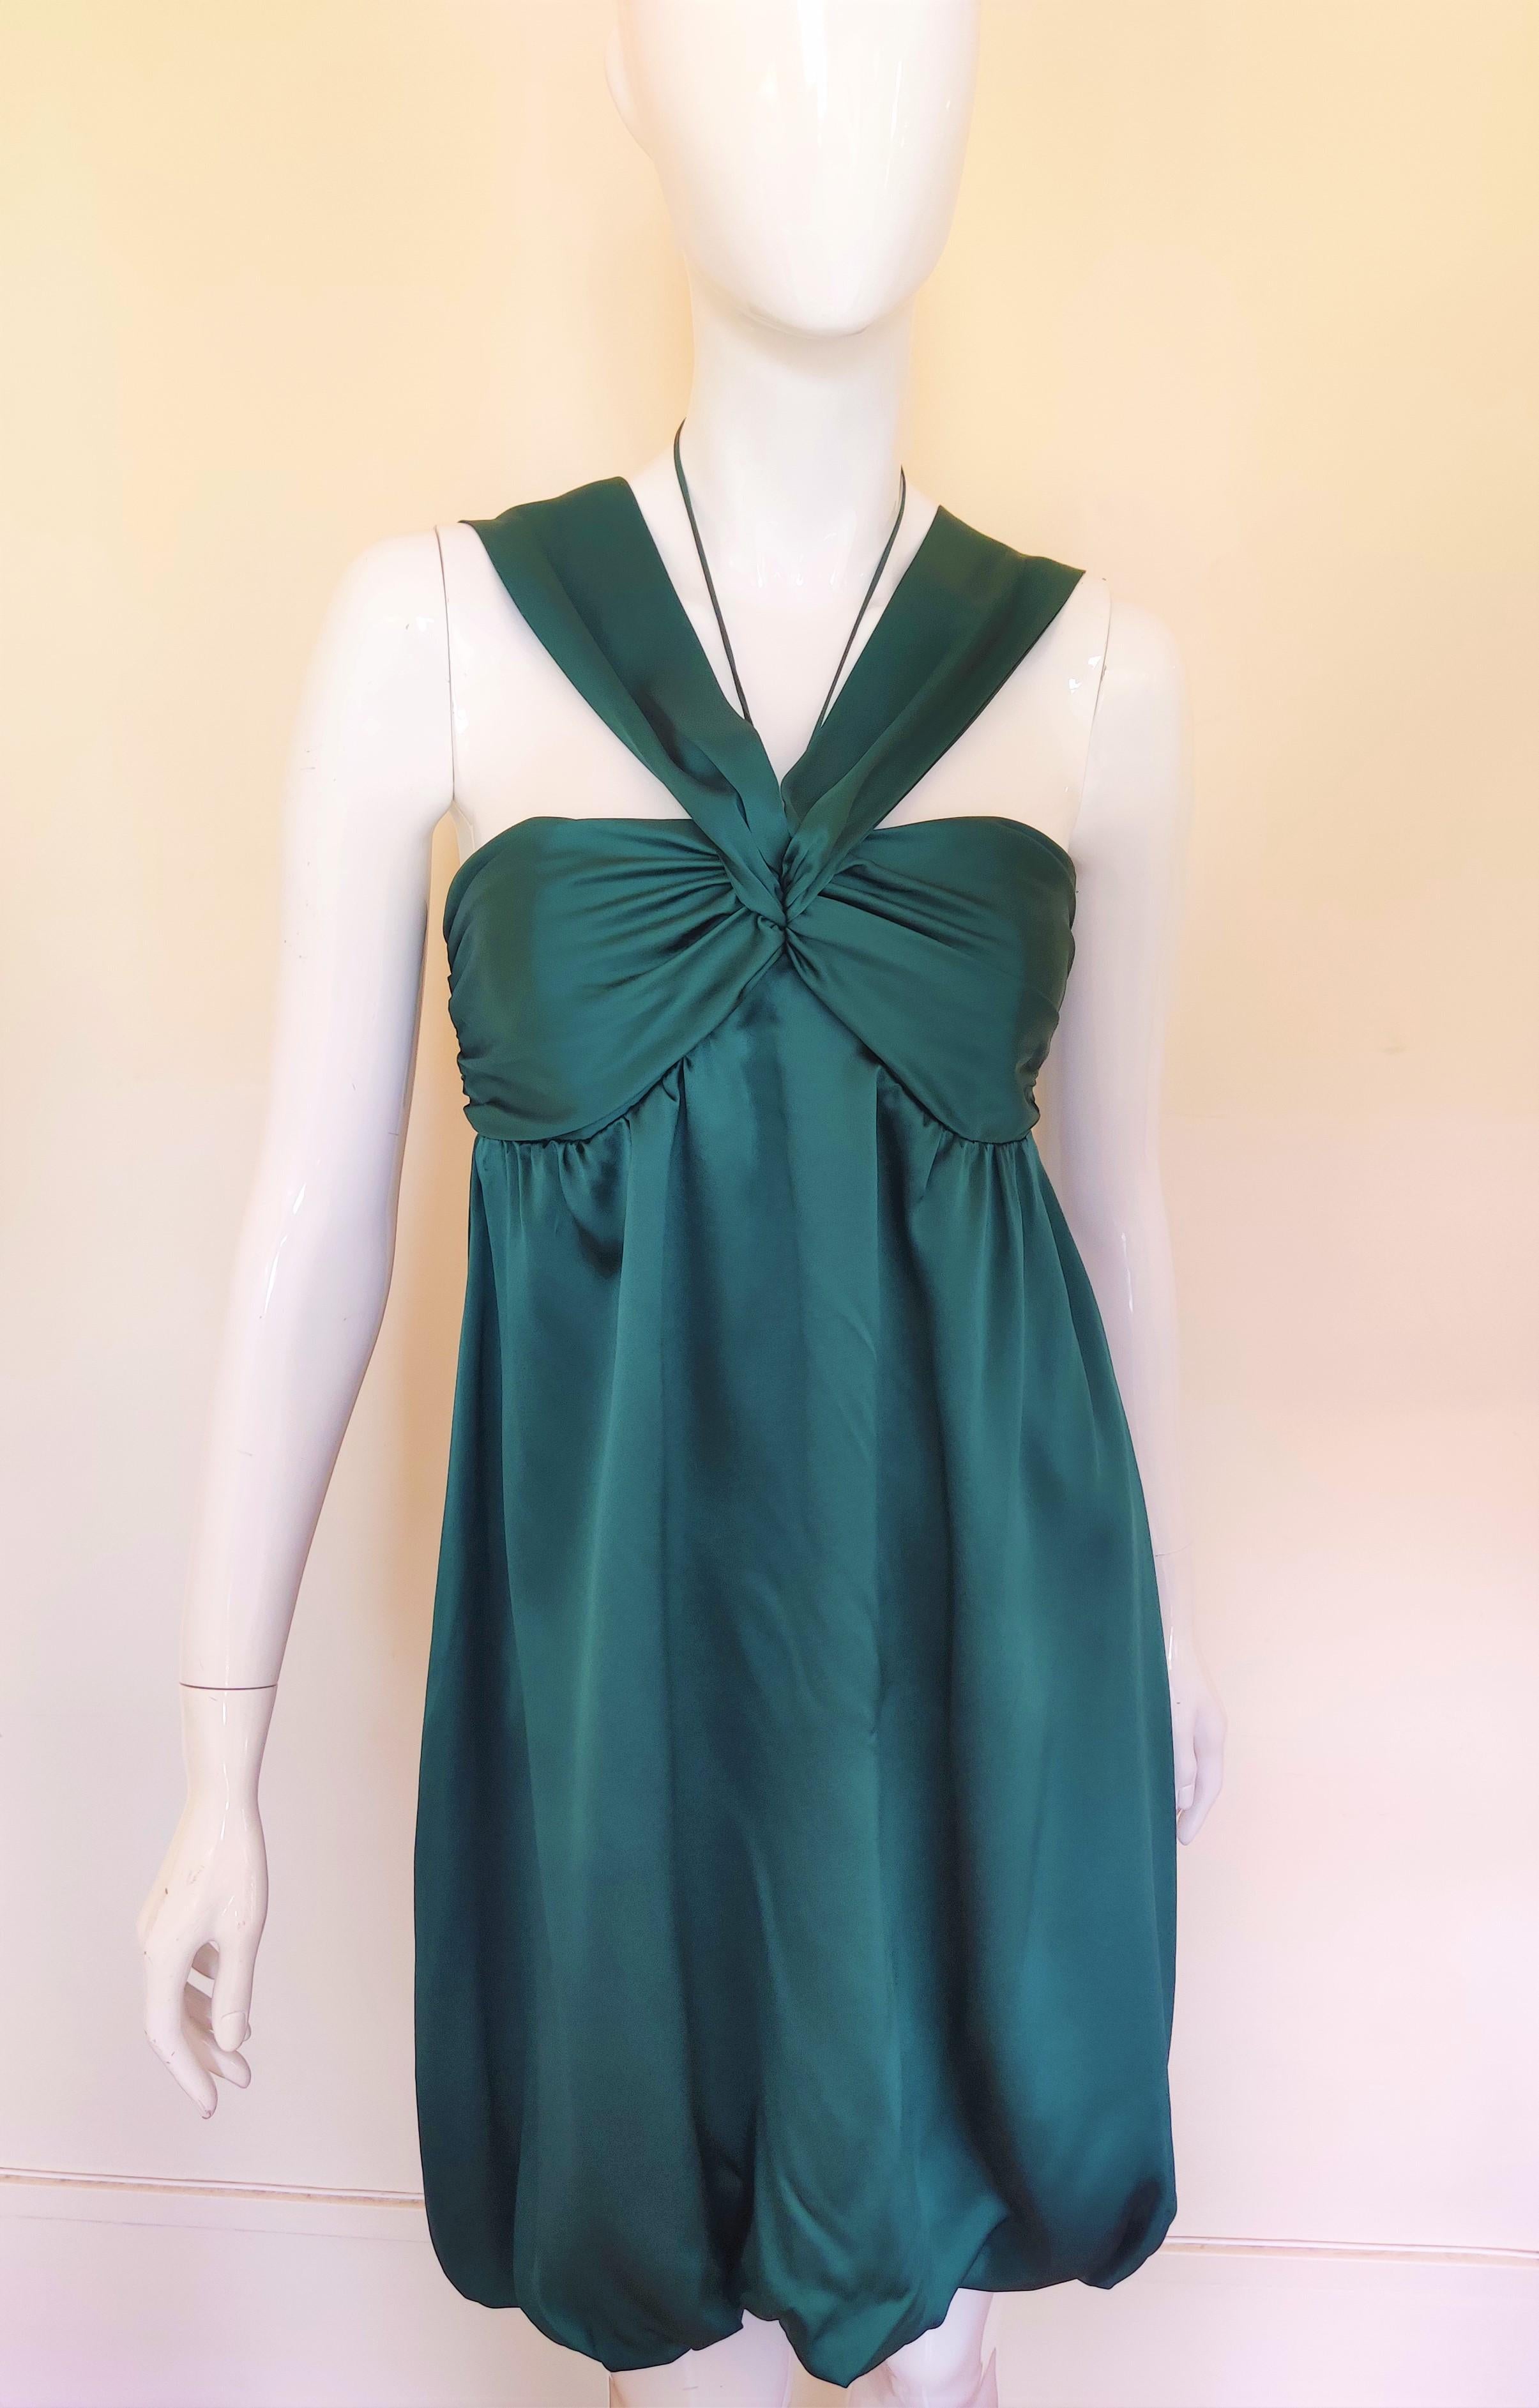 Alexander McQueen silk dress.
You can variate the straps, they can be placed on your shoulder, or let your shoulder free.
100% silk.


VERY GOOD condition!

SIZE
Medium.
Marked size: Italian 42.
Length (with the srtap): 88 cm / 34.6 inch
Bust: 38 cm